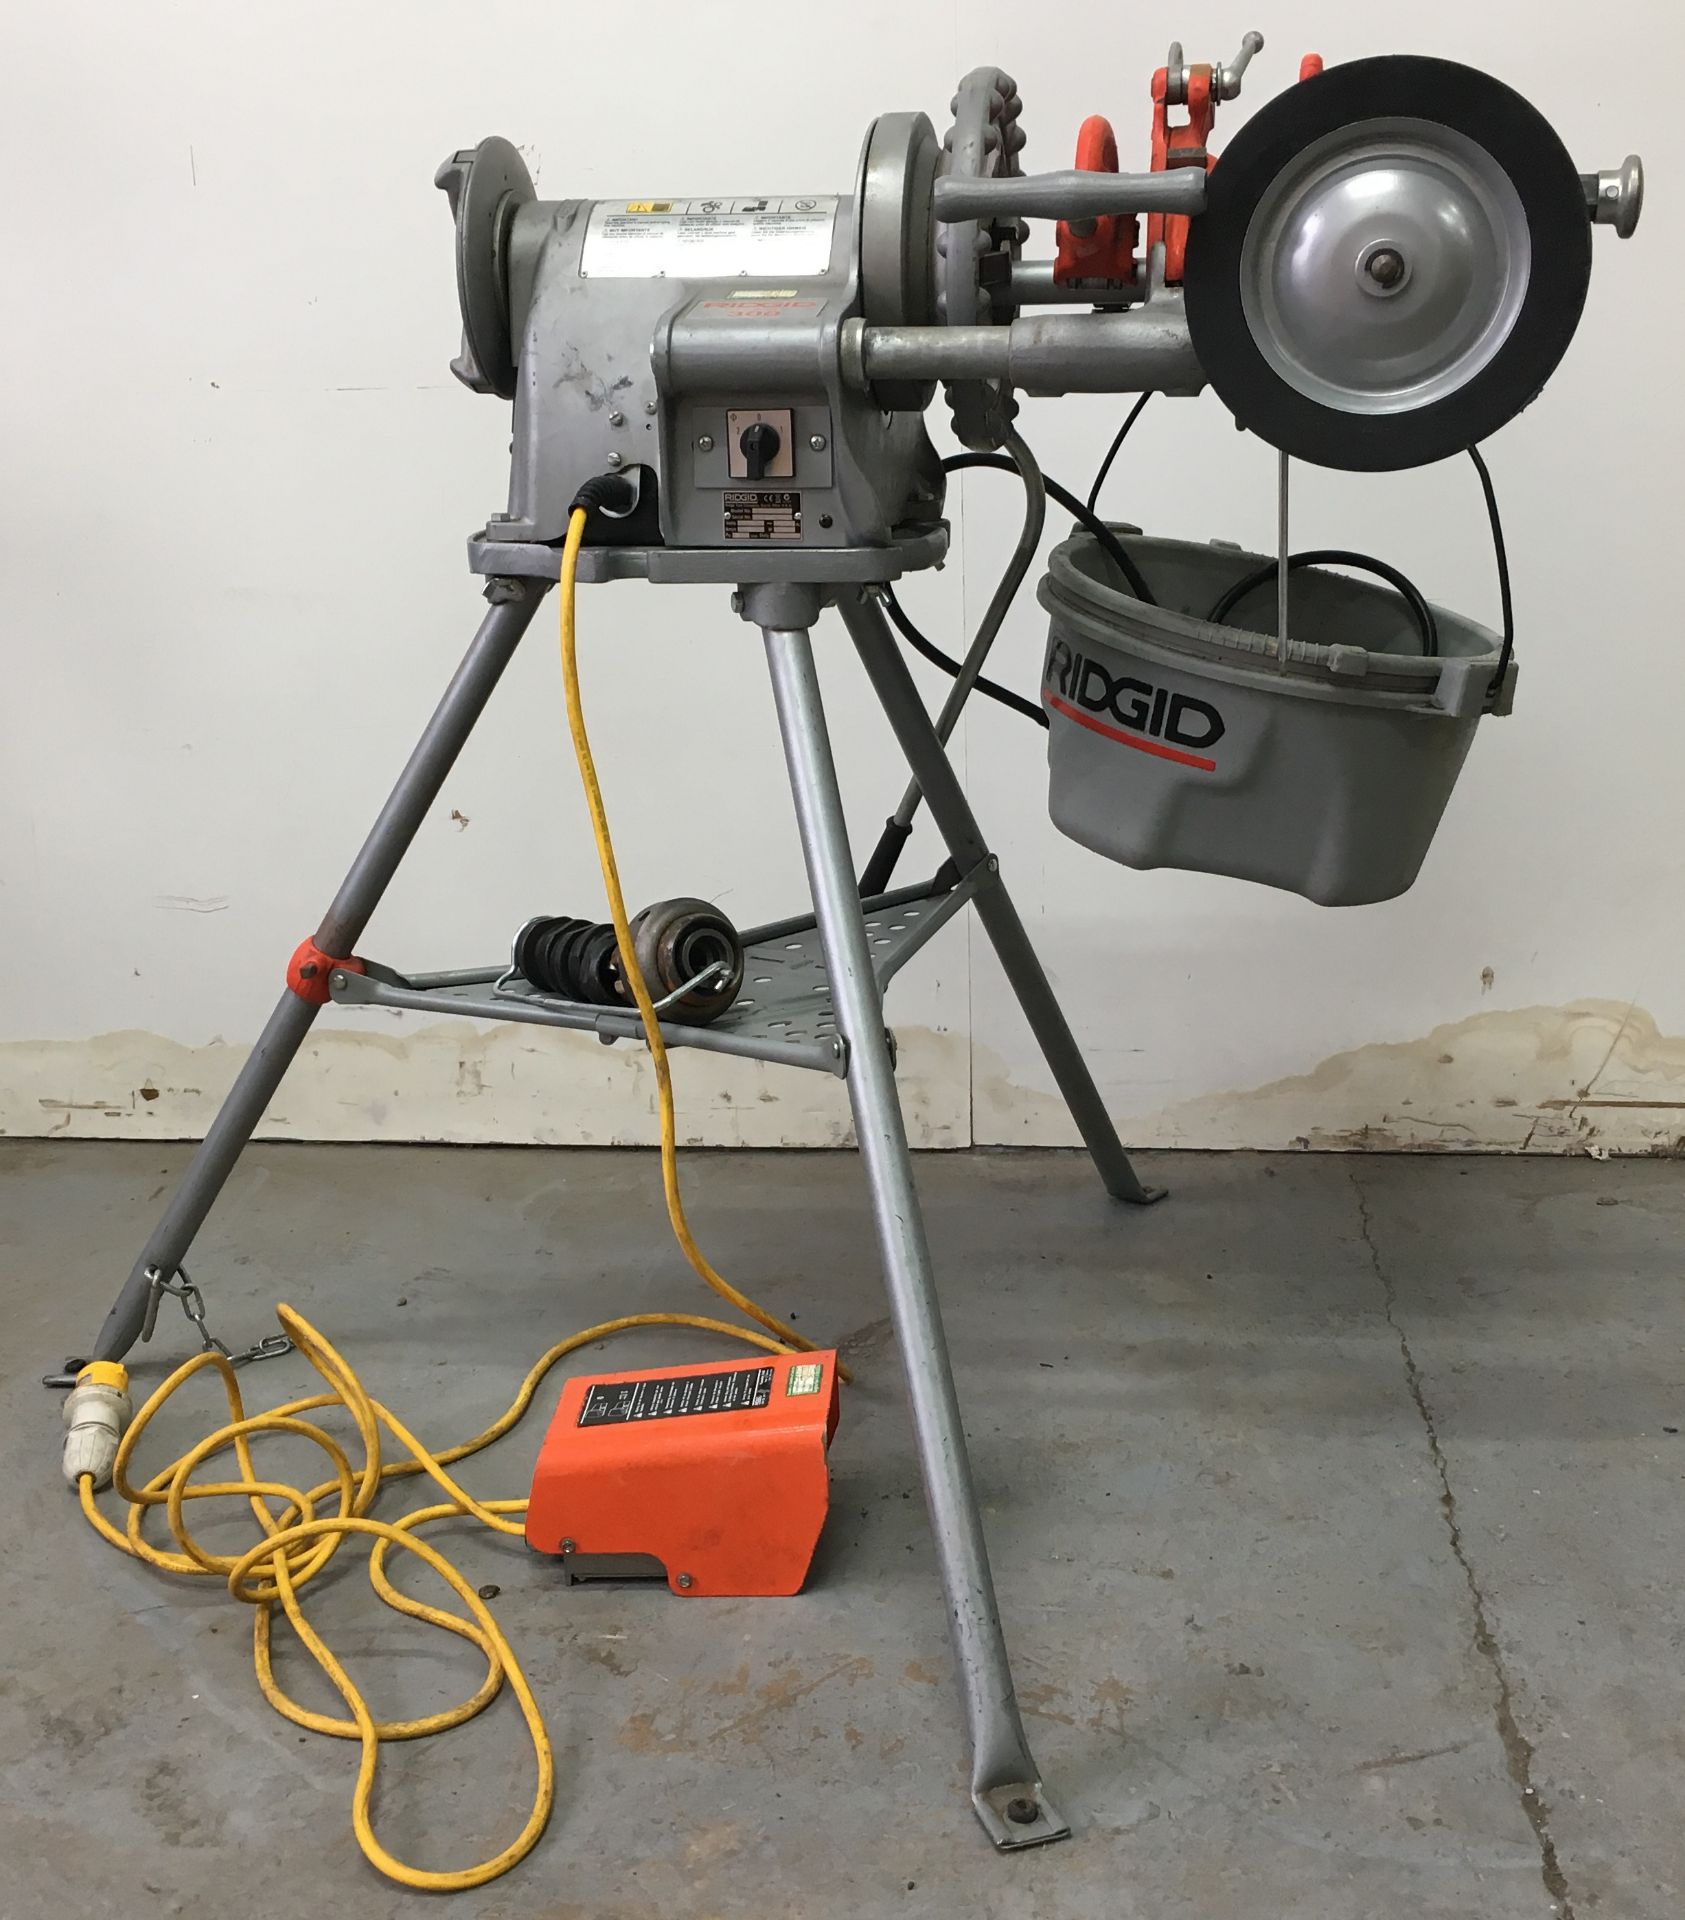 Ridgid 300 electric pipe threader with foot switch and oil bucket